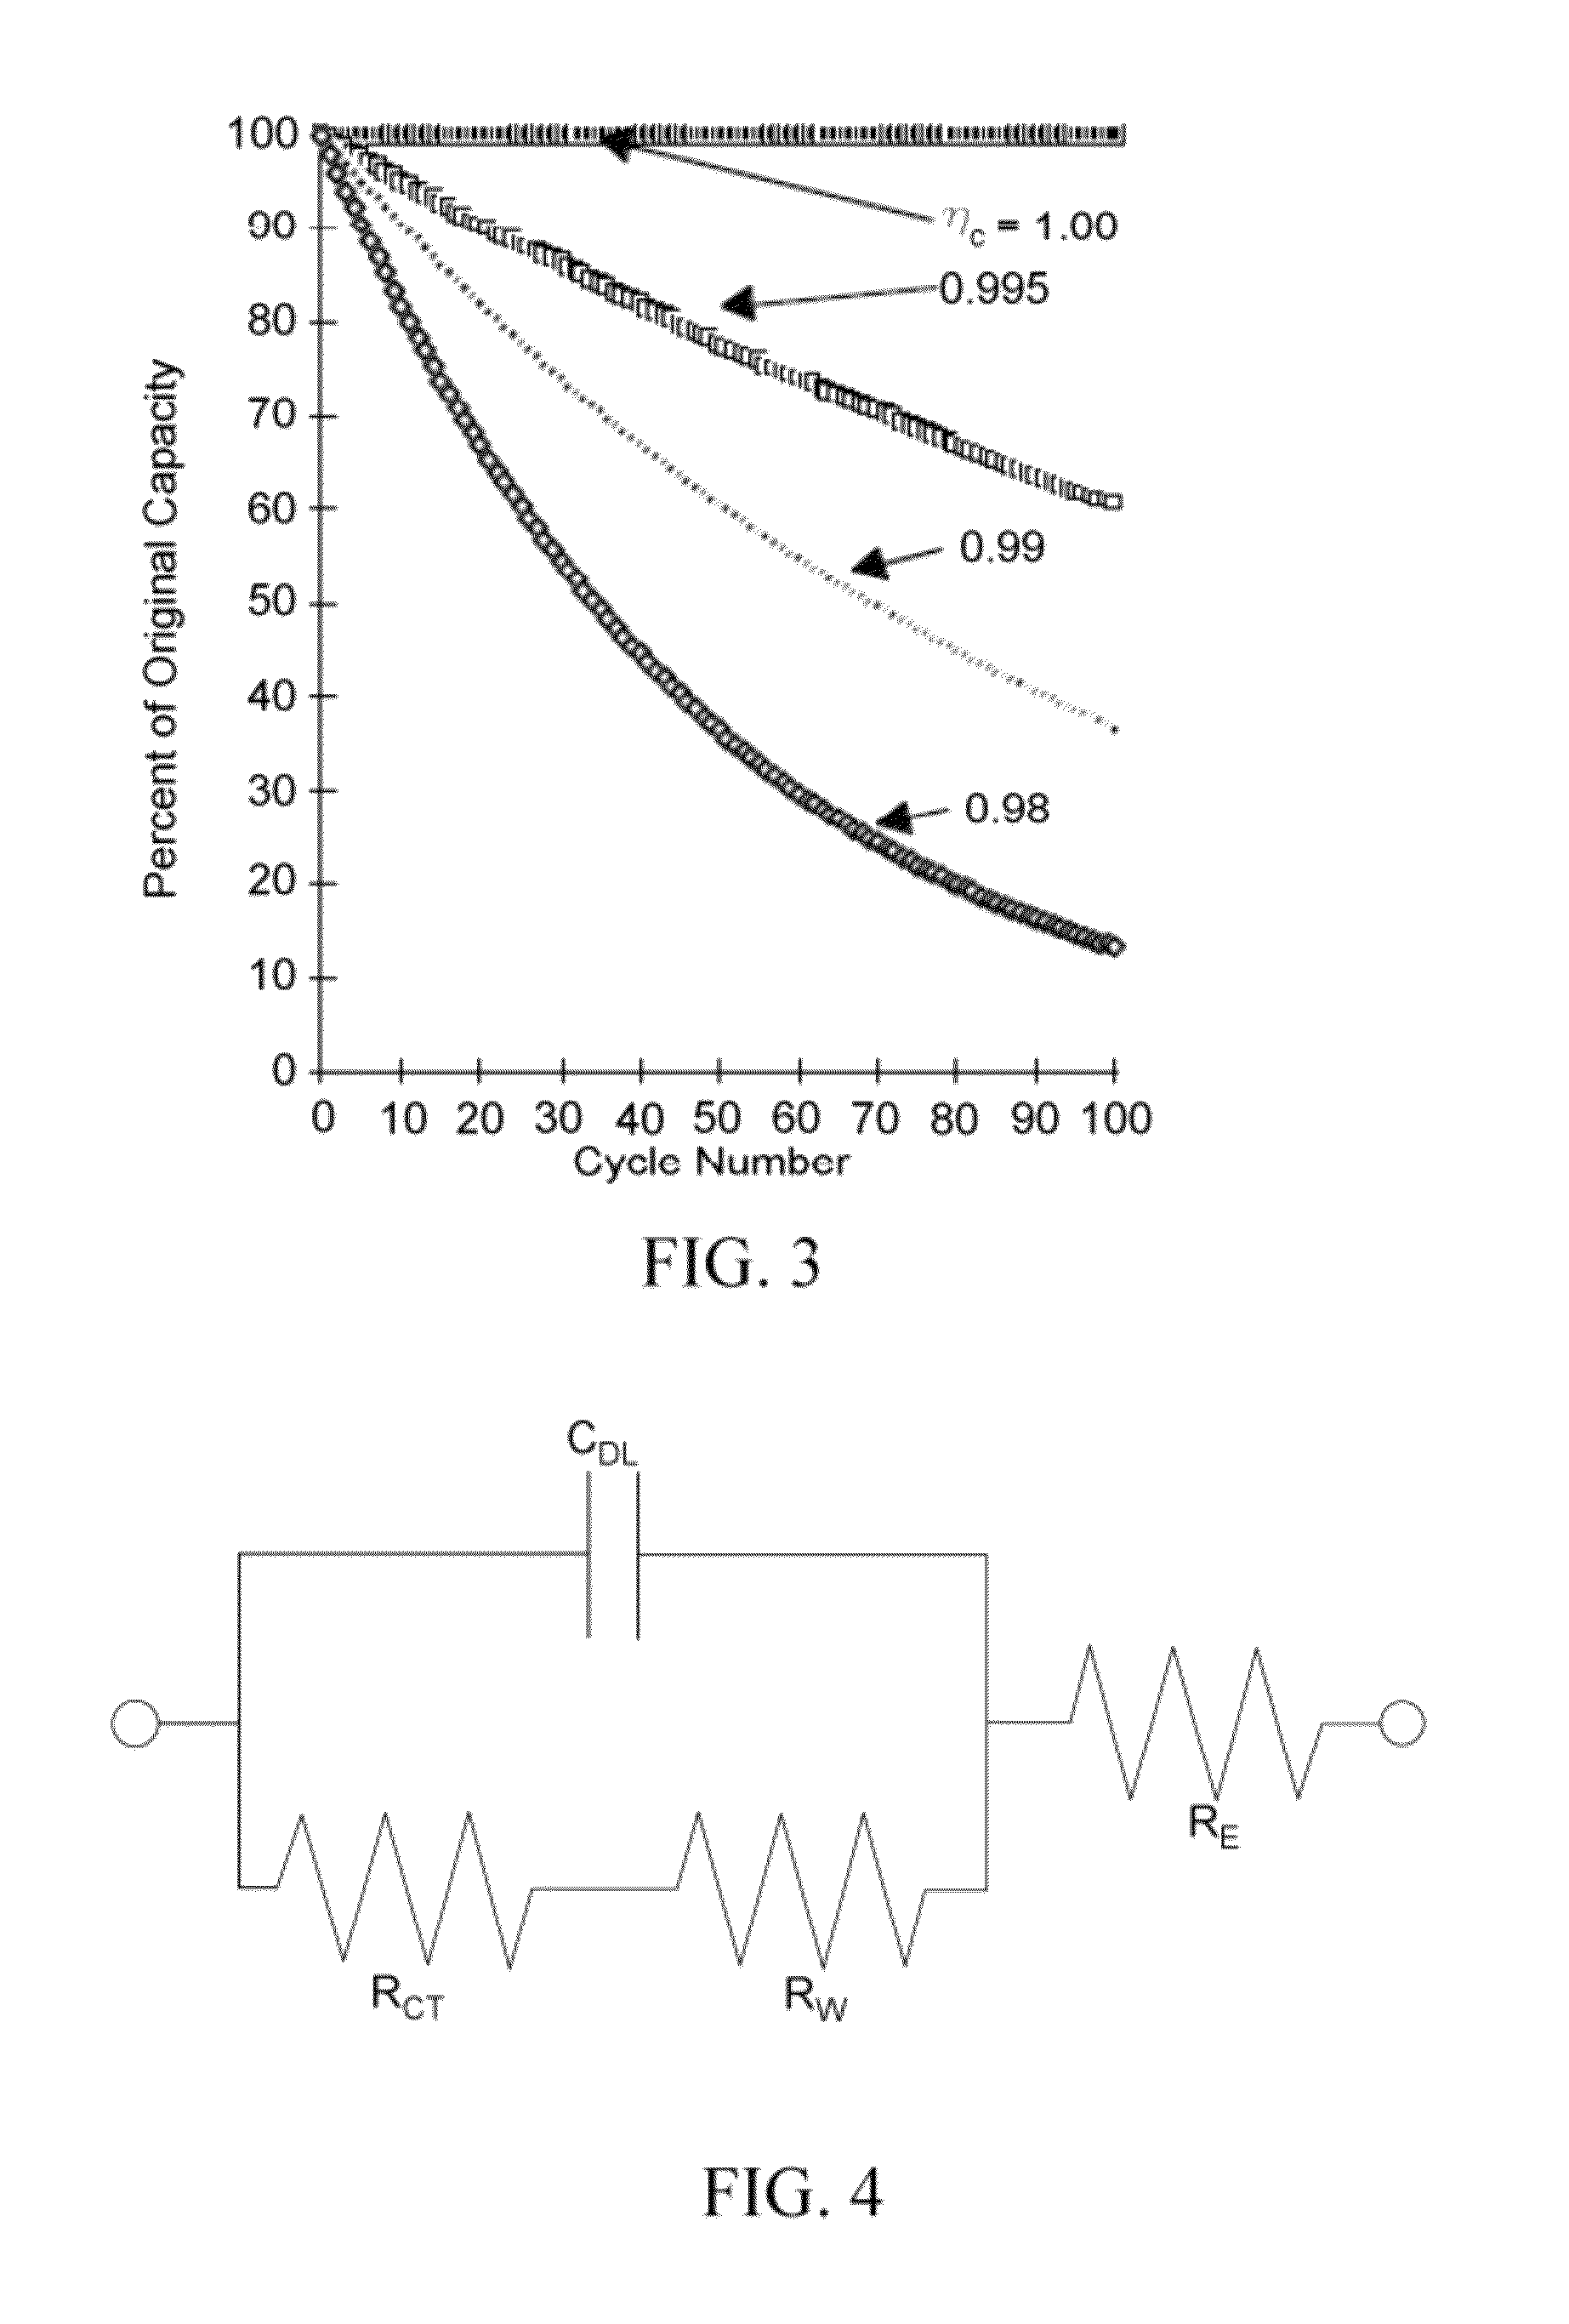 Model-based prognostics for batteries which estimates useful life and uses a probability density function